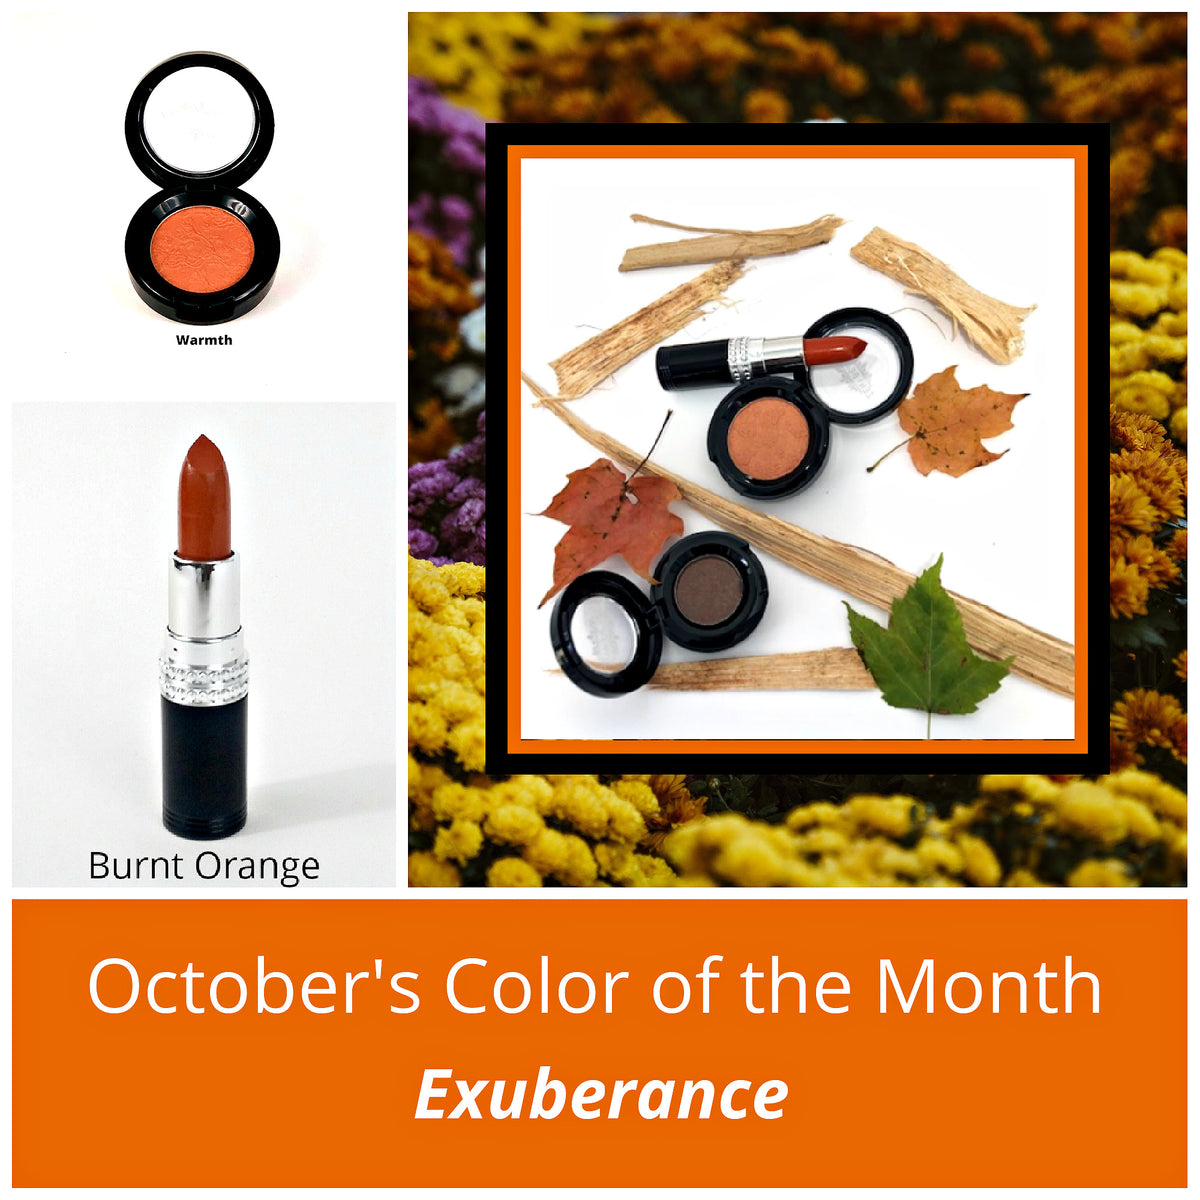 October's Color of the Month is Exuberance